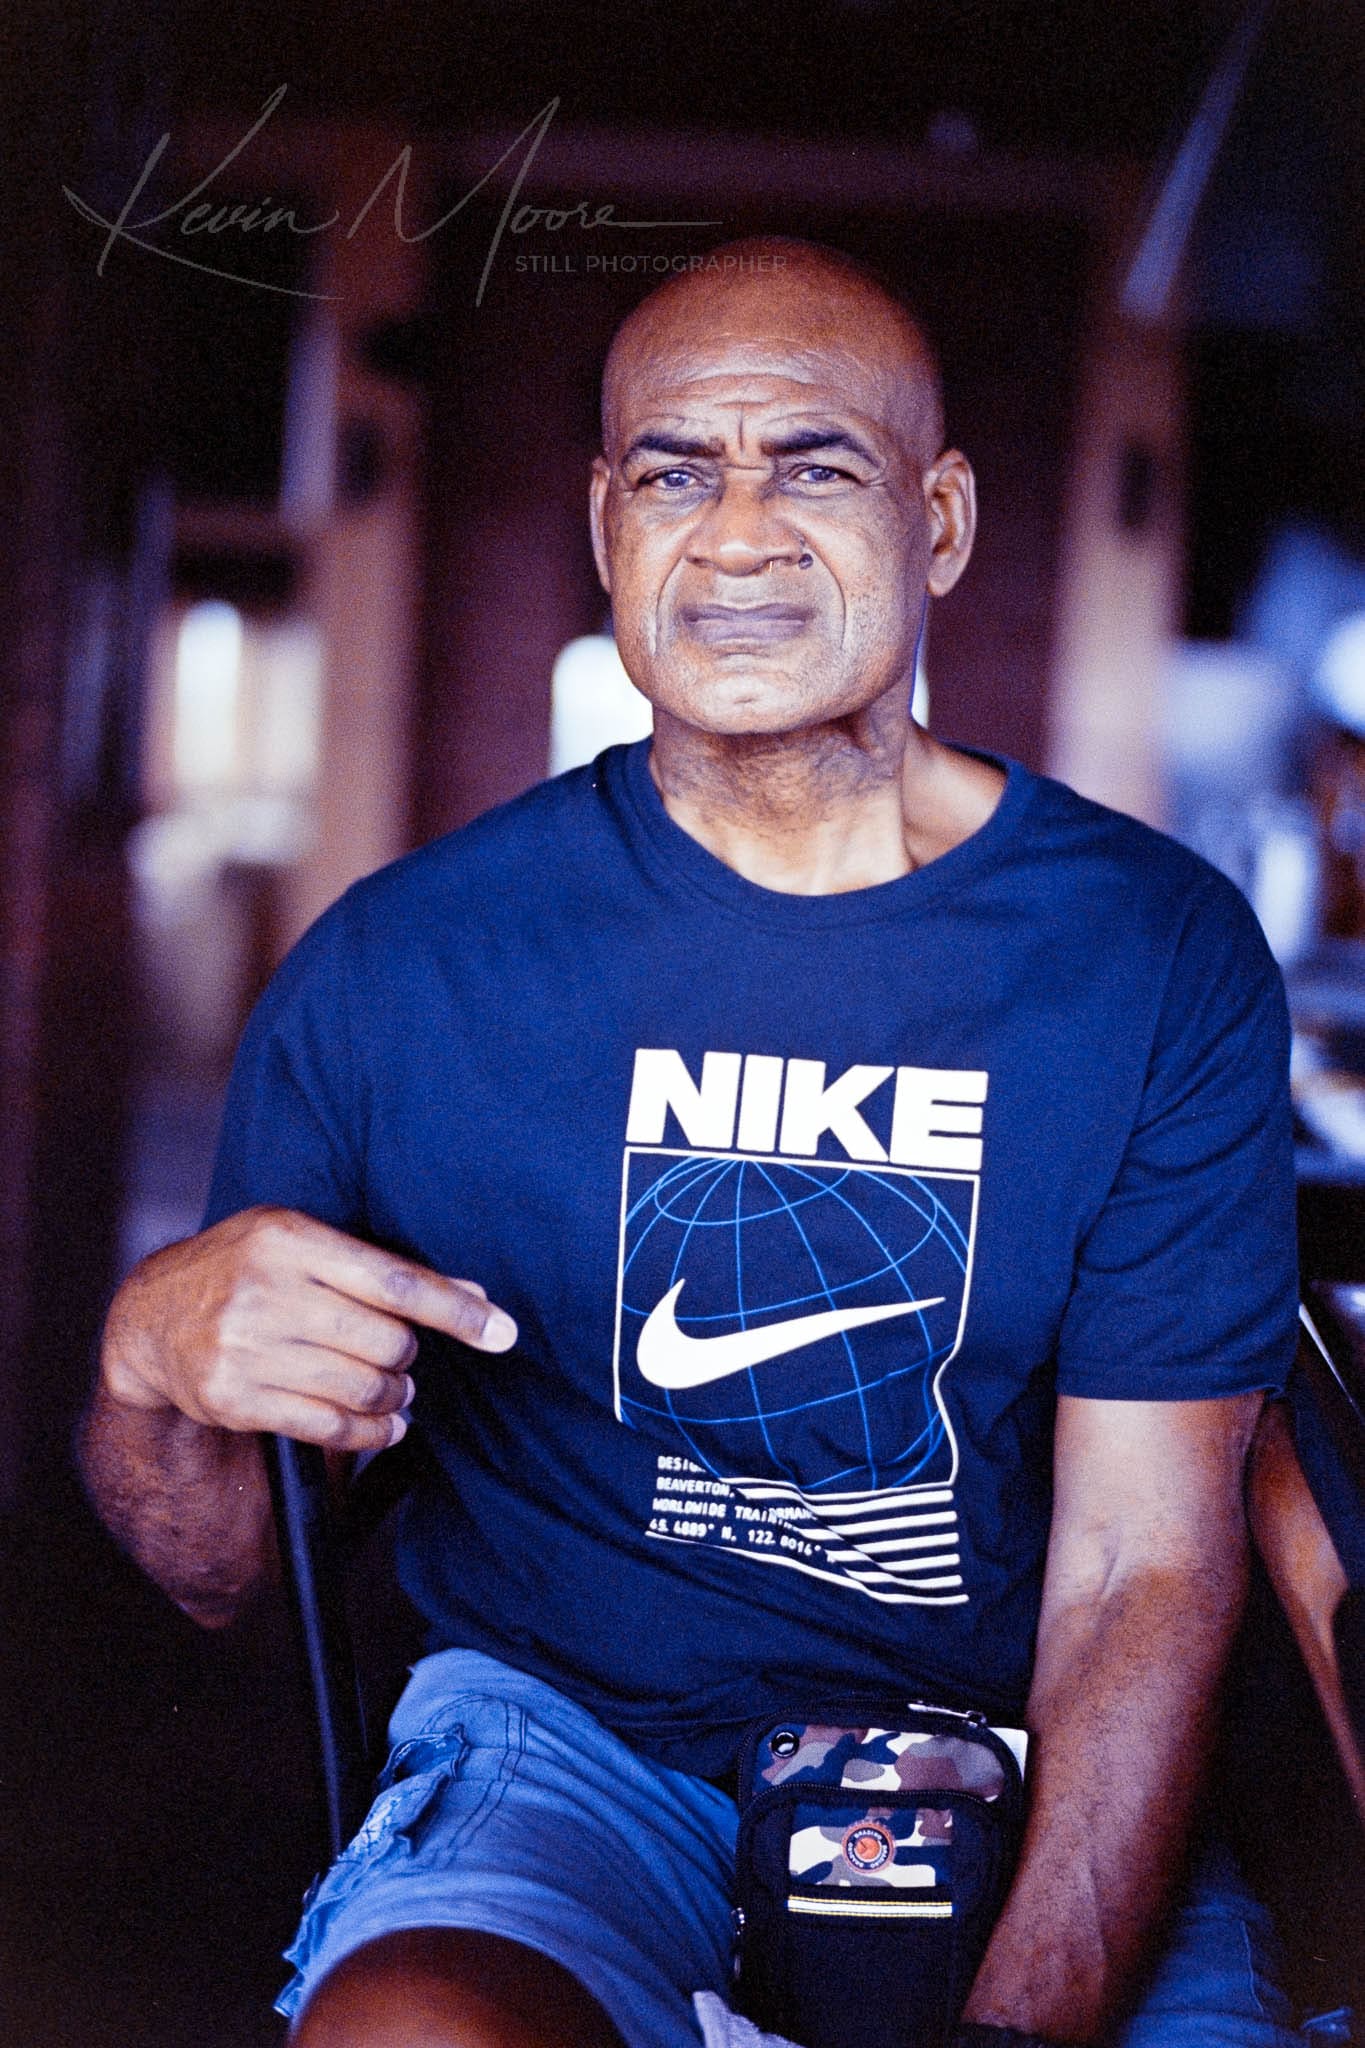 Confident mature man pointing at Nike logo on his t-shirt indoors.